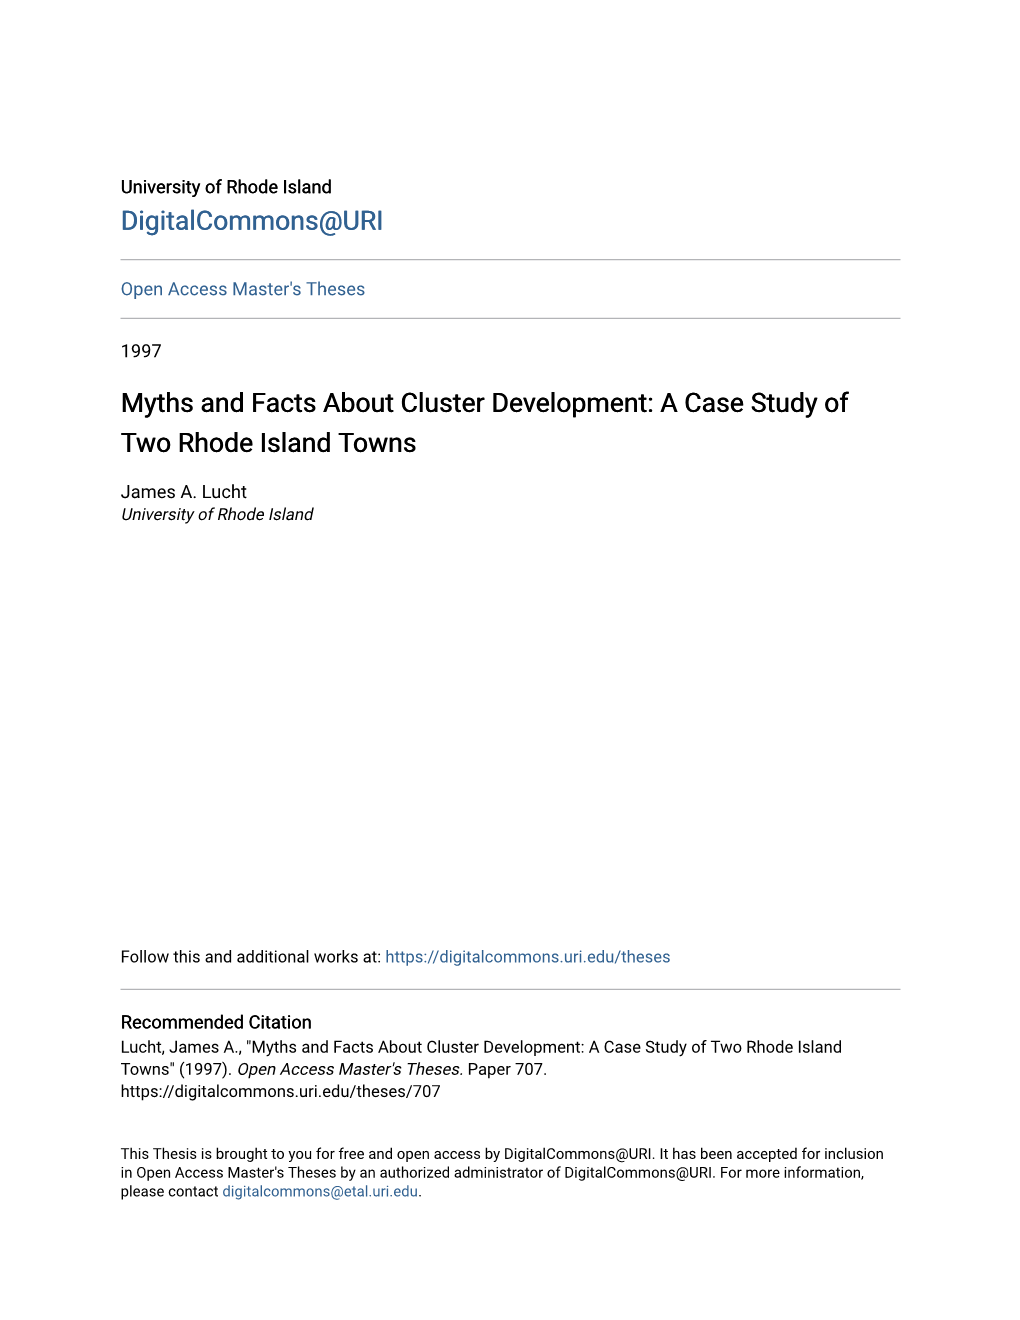 Myths and Facts About Cluster Development: a Case Study of Two Rhode Island Towns